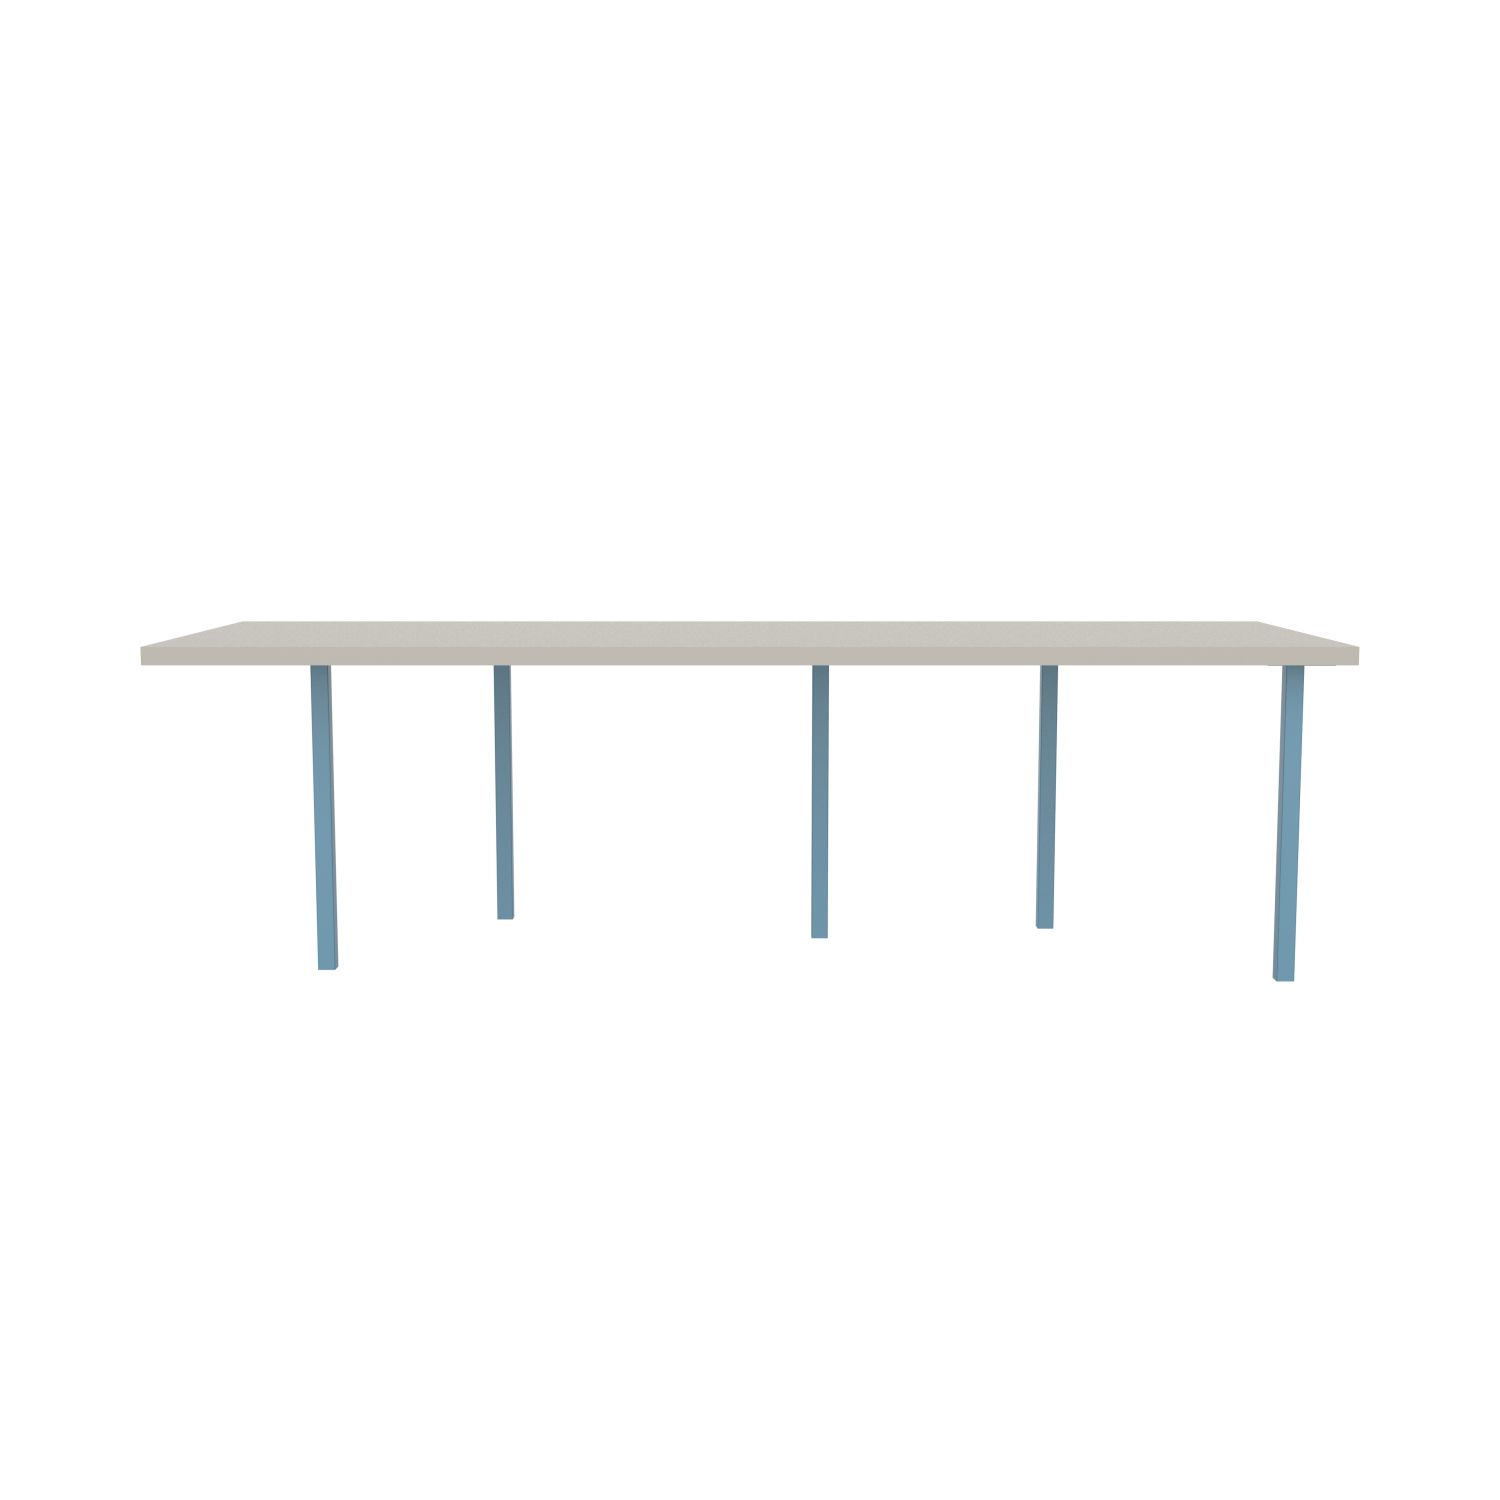 lensvelt bbrand table five fixed heigt 915x264 hpl white 50 mm price level 1 blue ral5024